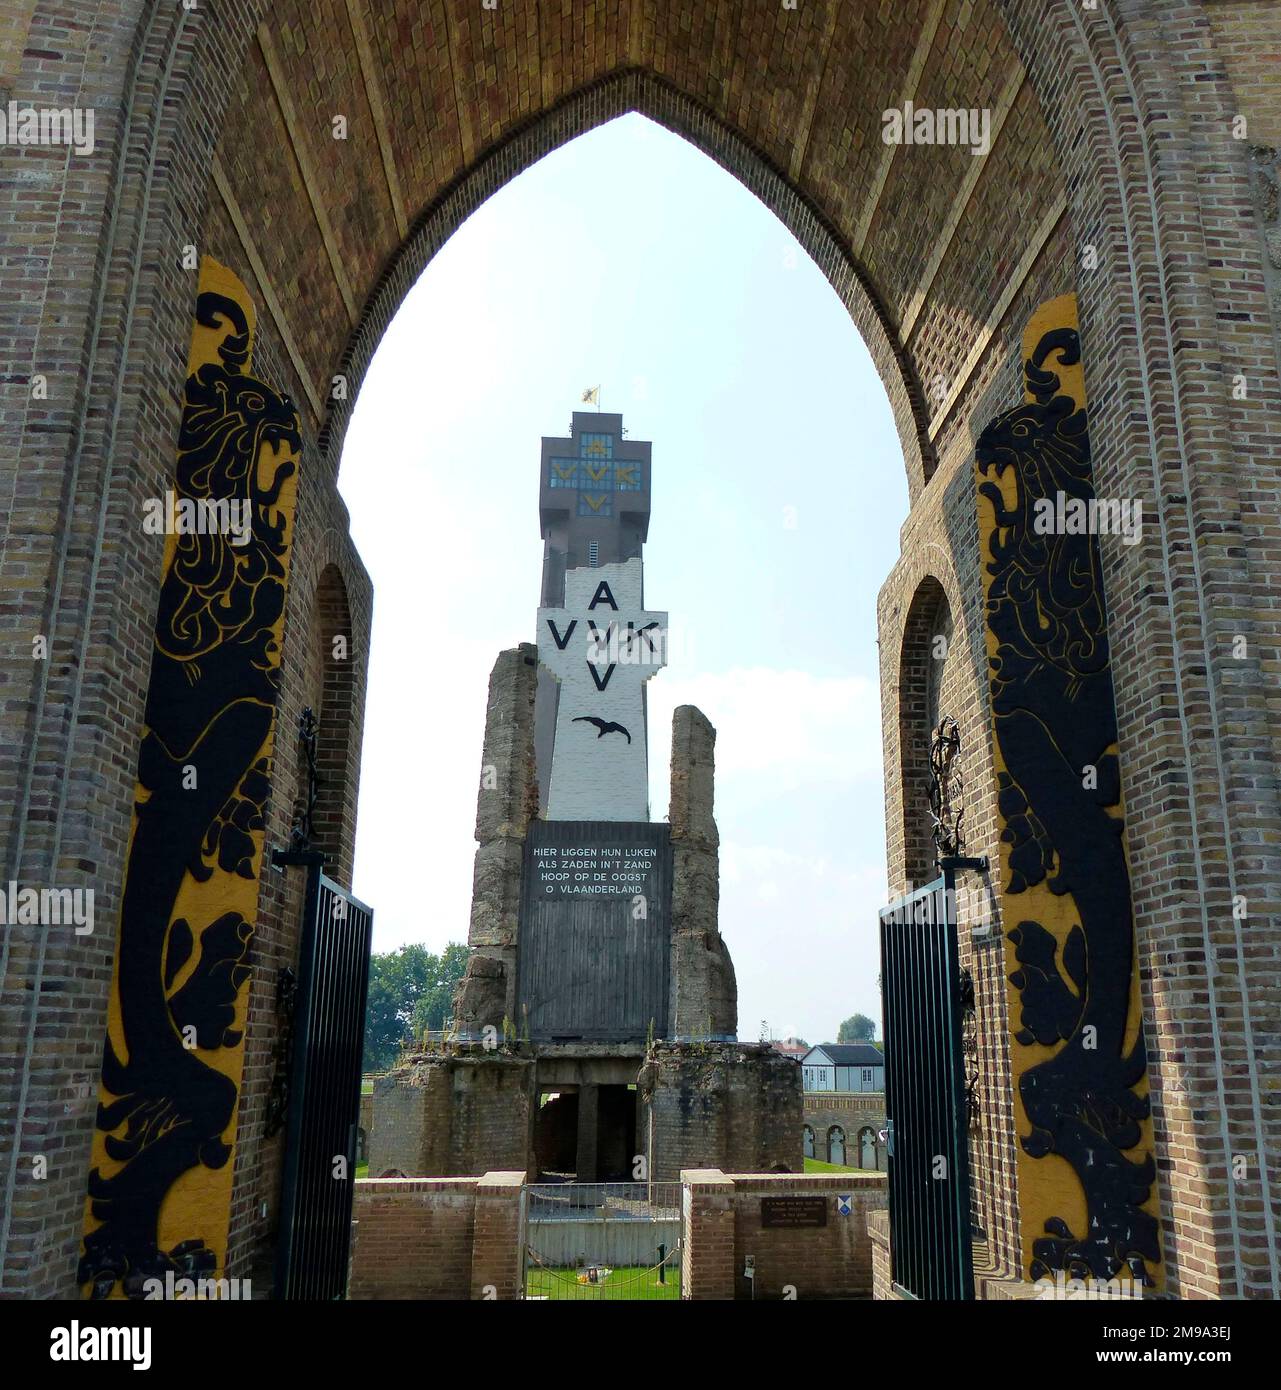 Listed as an International Peace Centre, the Tower is a symbol of Flemish Nationalism which came to a head during the First World War. The Towers history goes back to the 18th Century. The letters AVVVK on the Tower stand for Alles Voor Vlanderen. Vlanders Voor Kristus - All for Flanders. Flanders for Christ. The Celtic Cross headstones in the Tower grounds carry the AVVVK symbol and were designed by the Flemish artist Joe English. The Tower has different exhibitions on different floors and there are marvellous views over the whole countryside from the top. Stock Photo